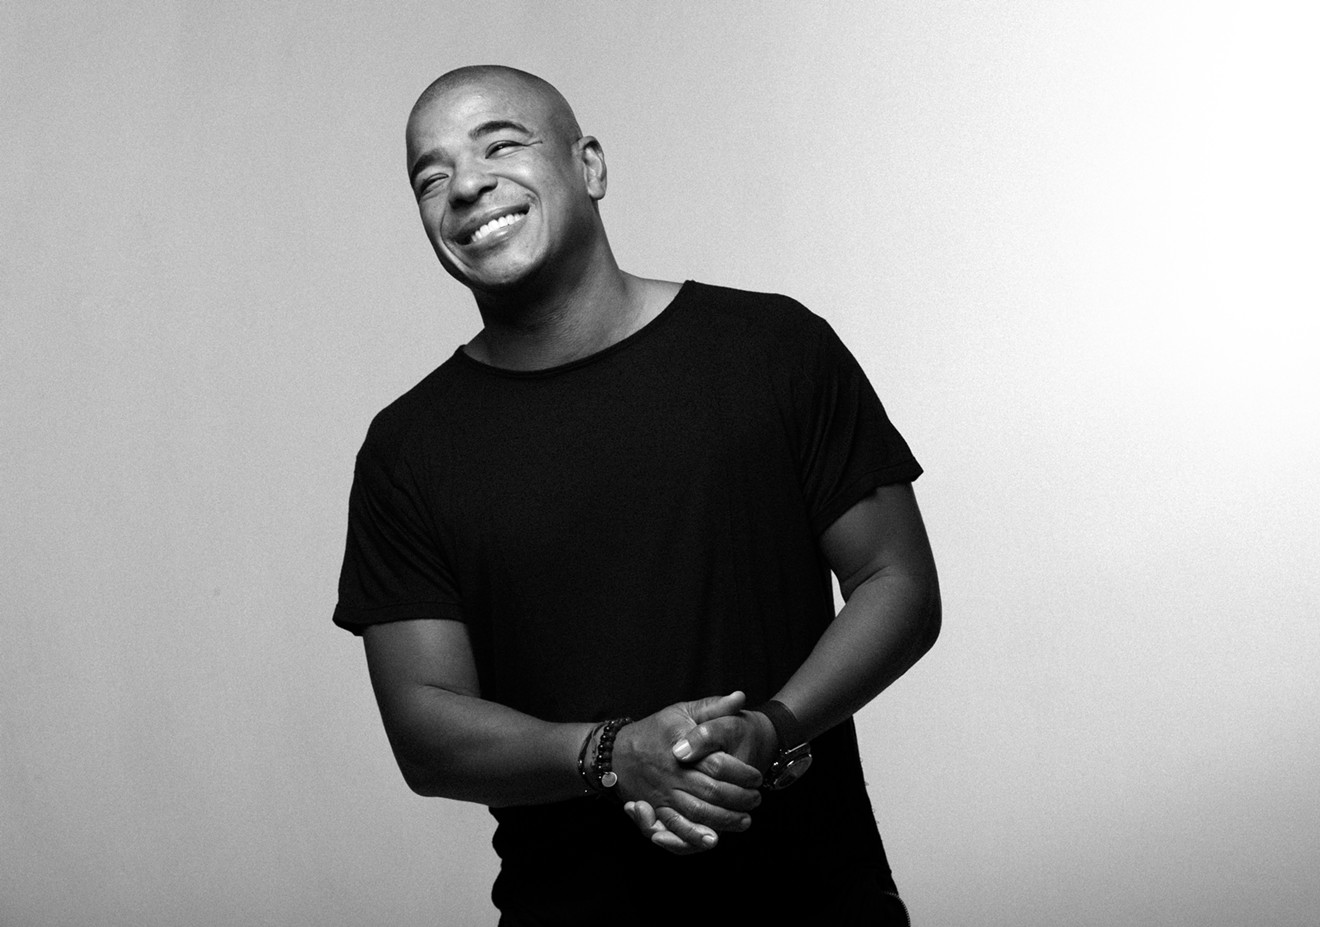 Erick Morillo will return to Miami for a set at Wynwood Factory Friday, December 20.